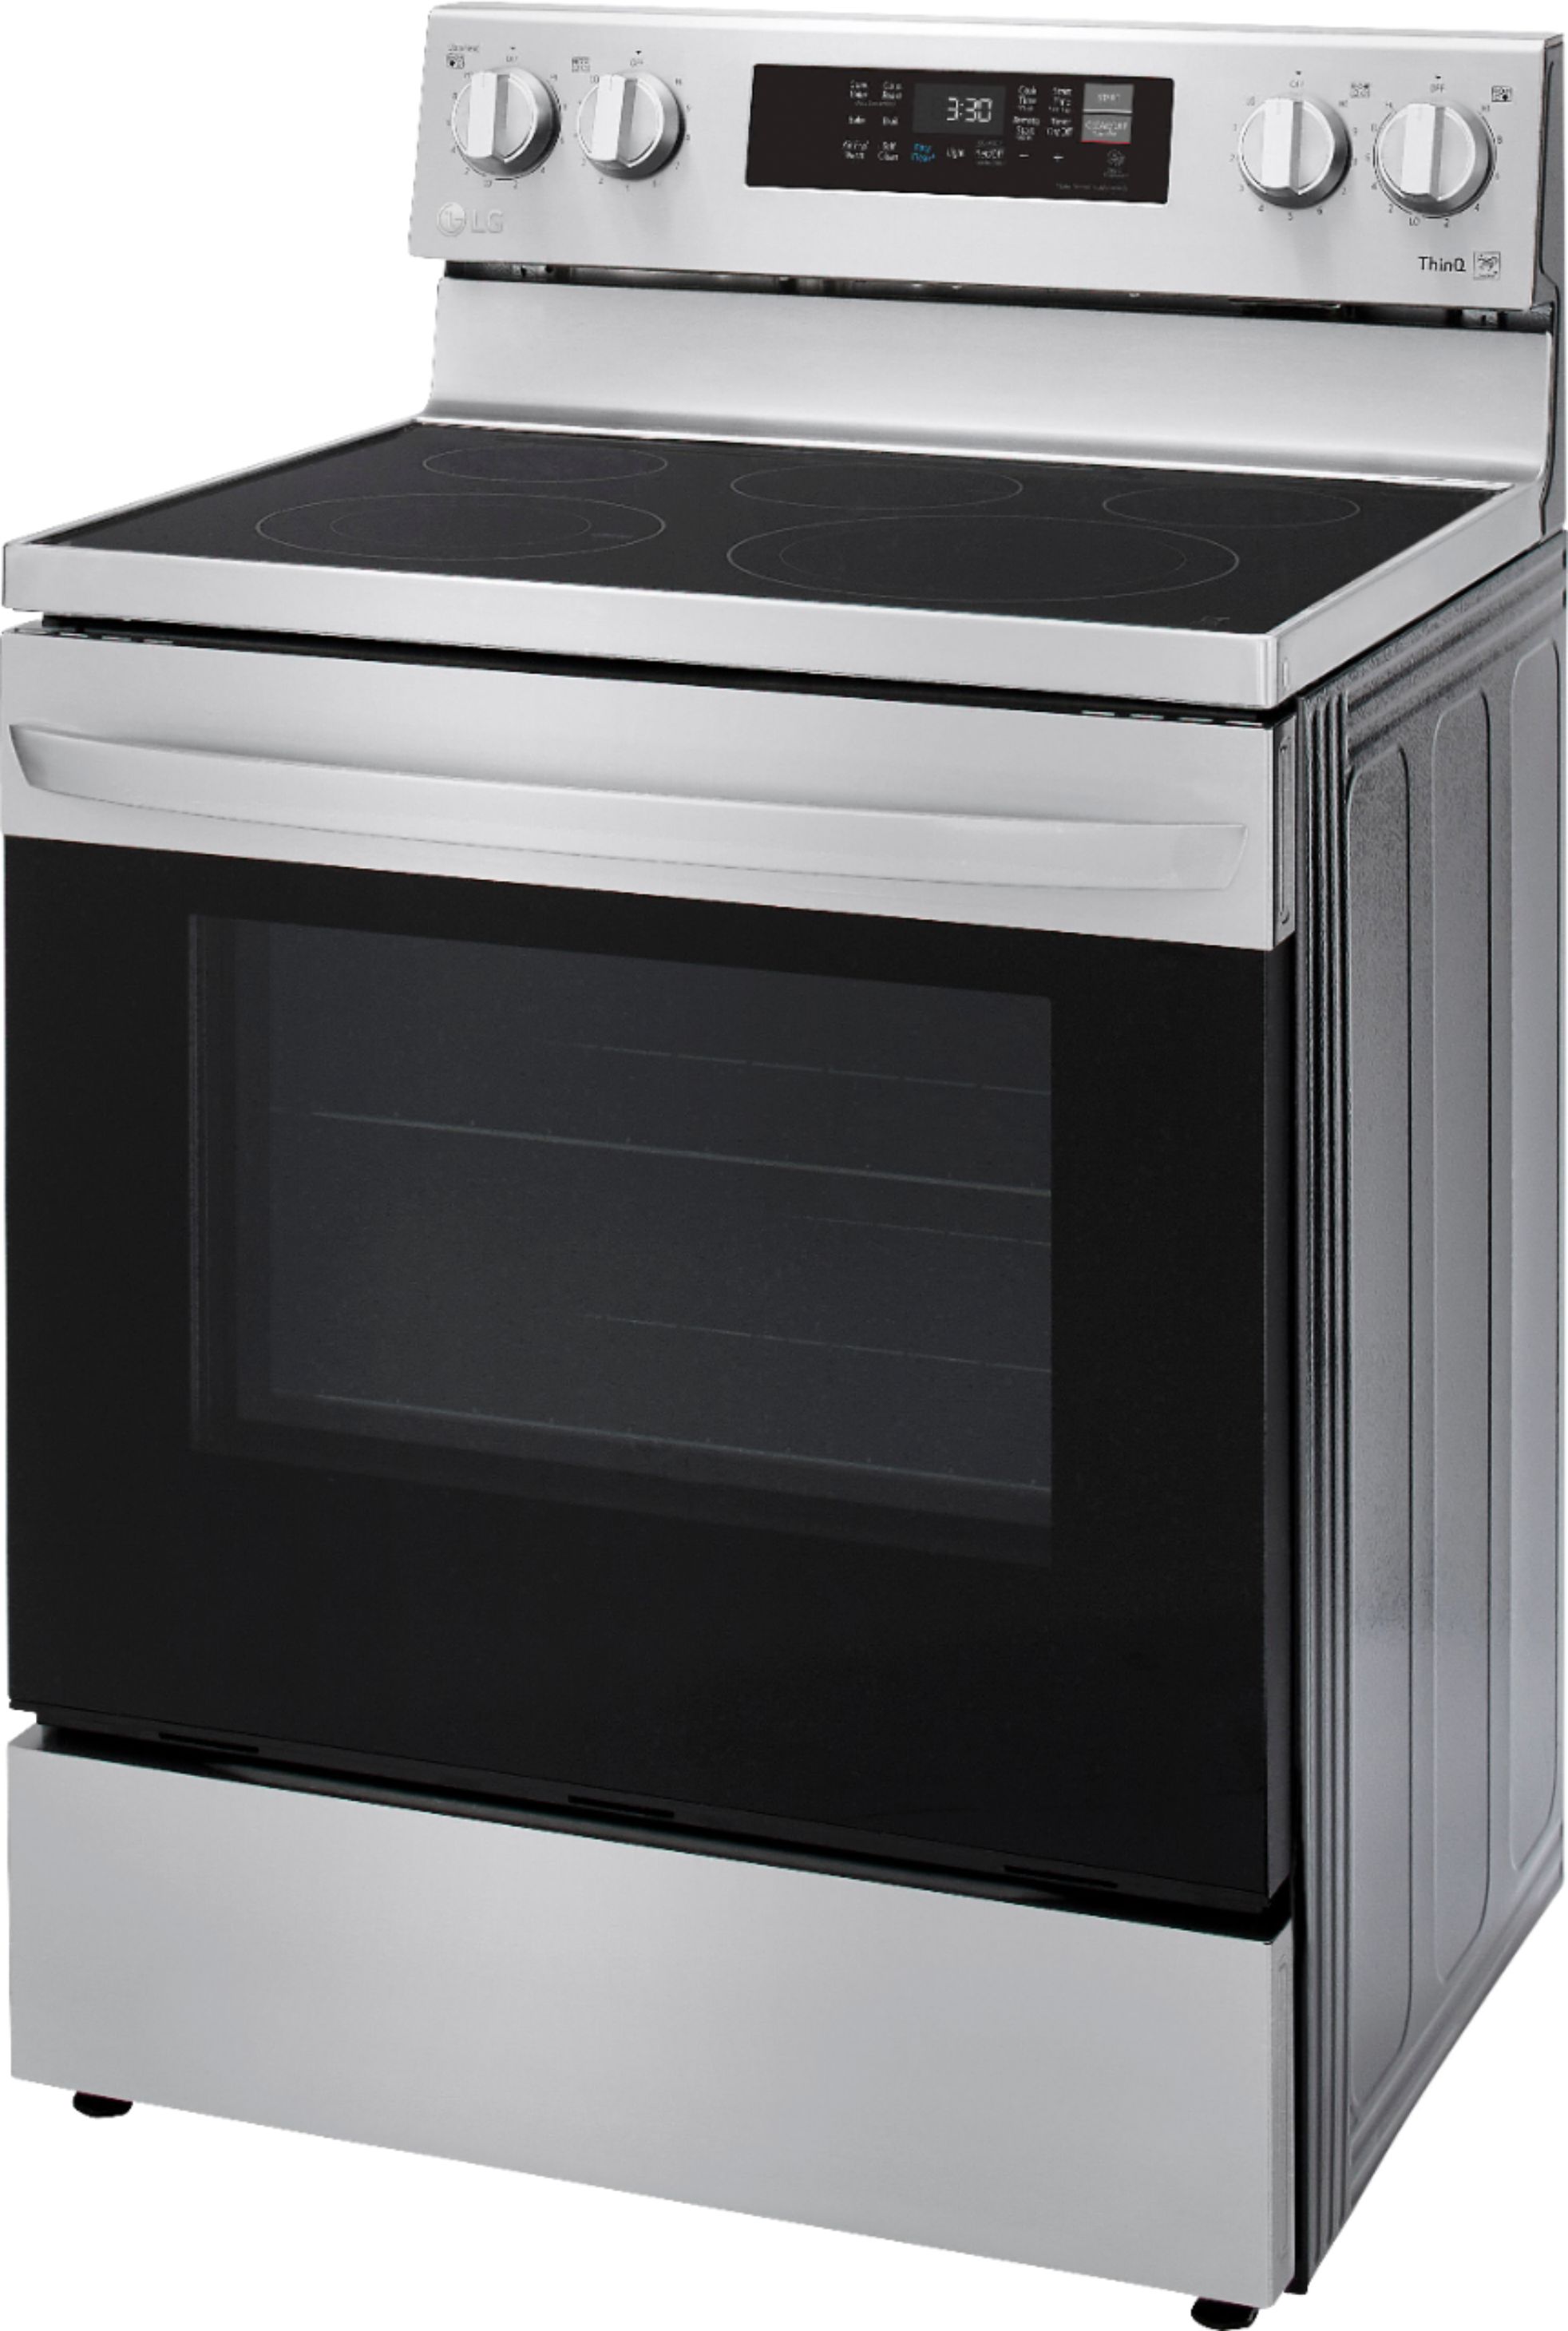 LG 6.3 cu ft. Smart Wi-Fi Electric Range with Air Fry - LREL6323S